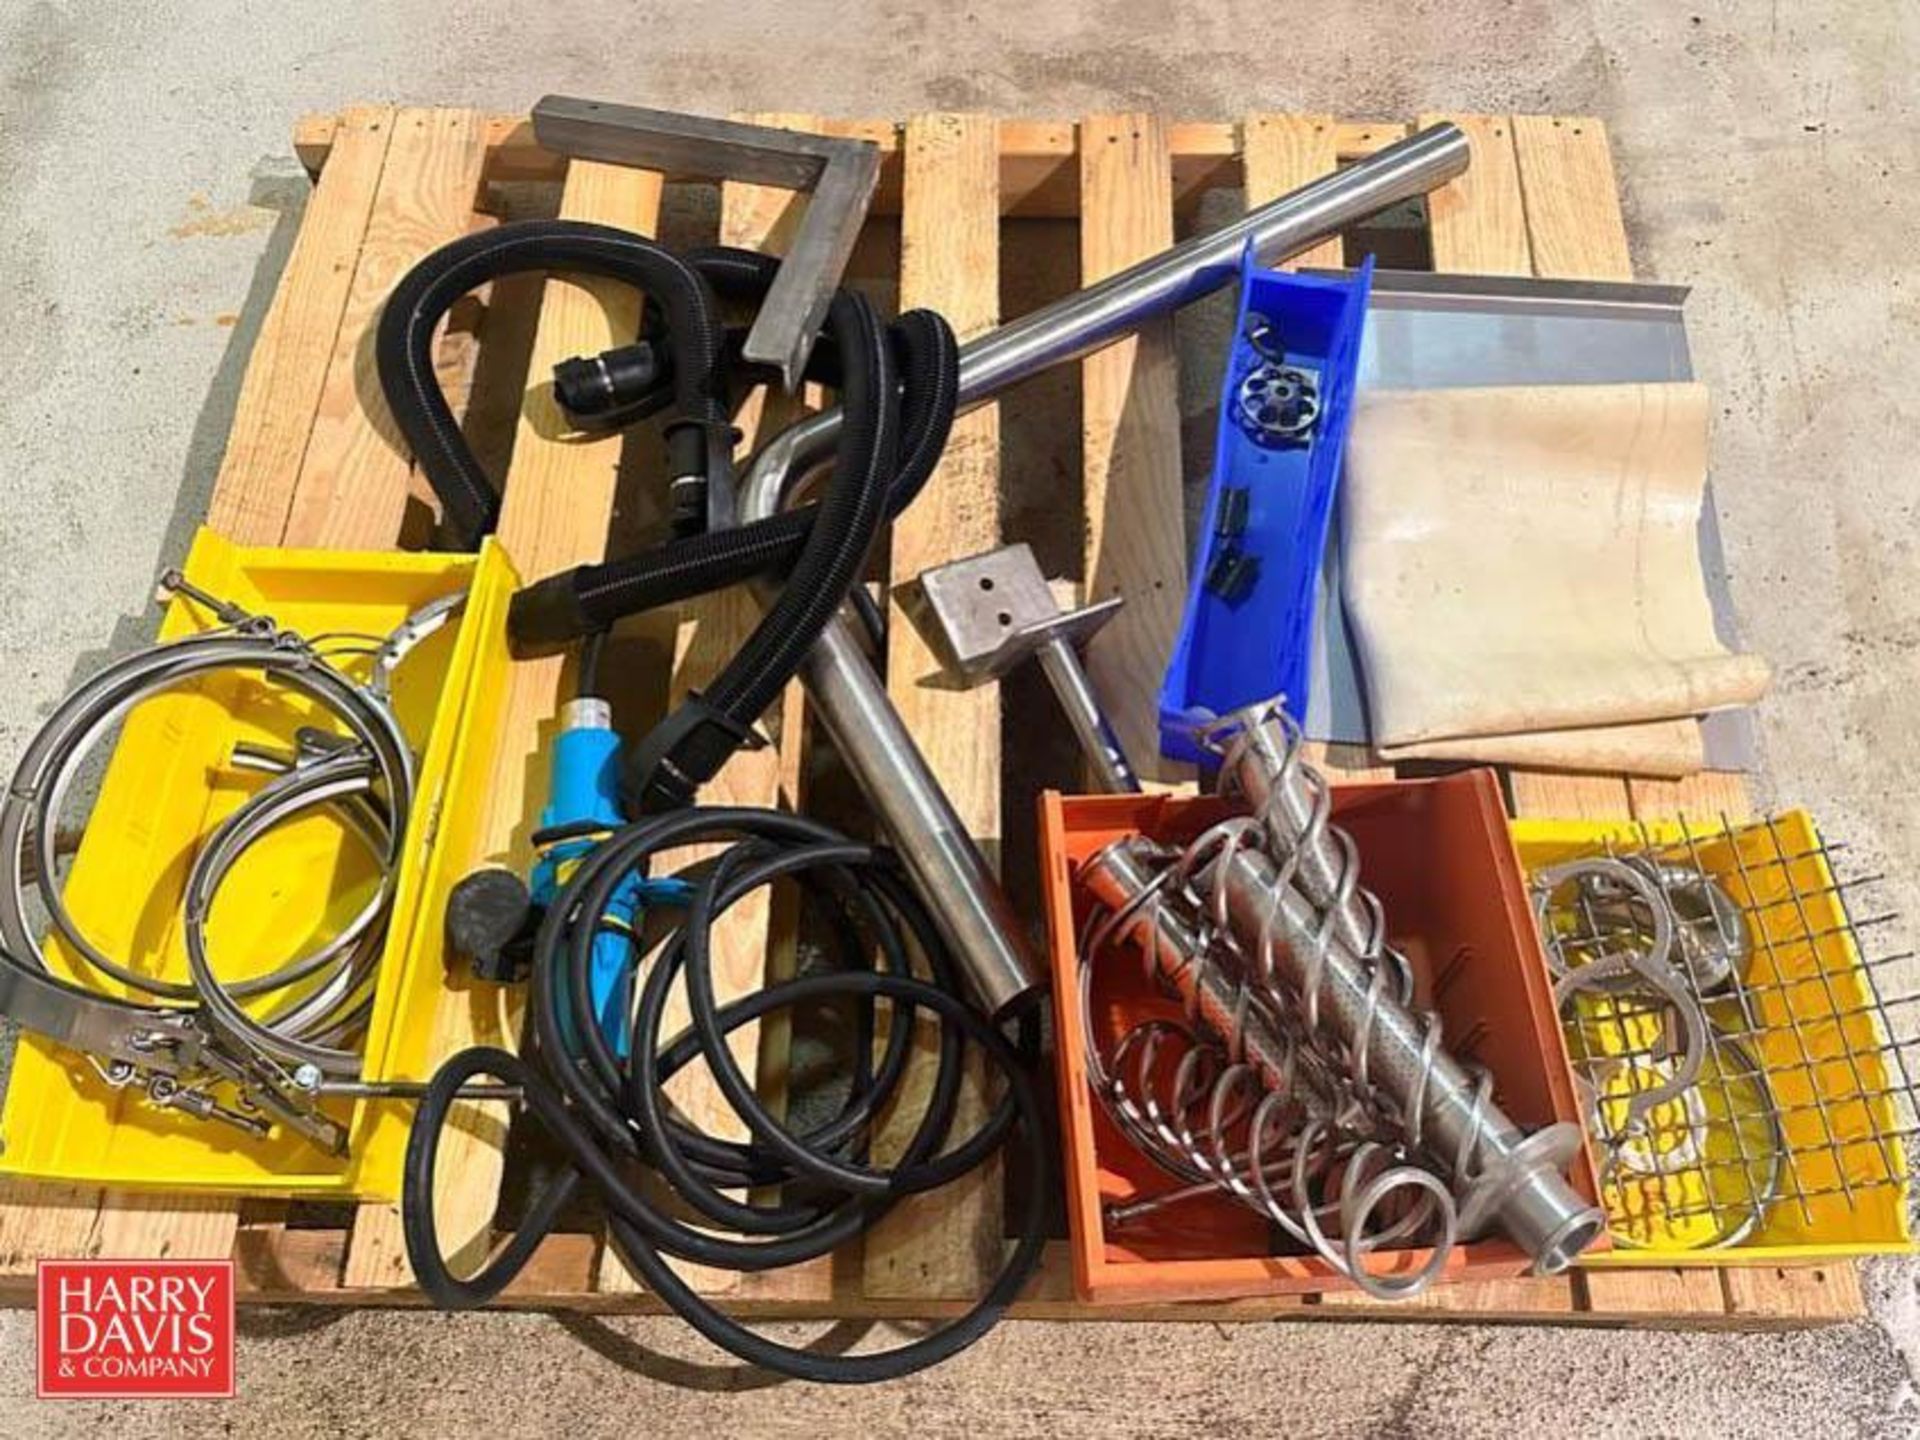 Assorted S/S, Including: Piping, Clamps, Basket, Bucket, Springs and Tape Machine Head - Image 5 of 5